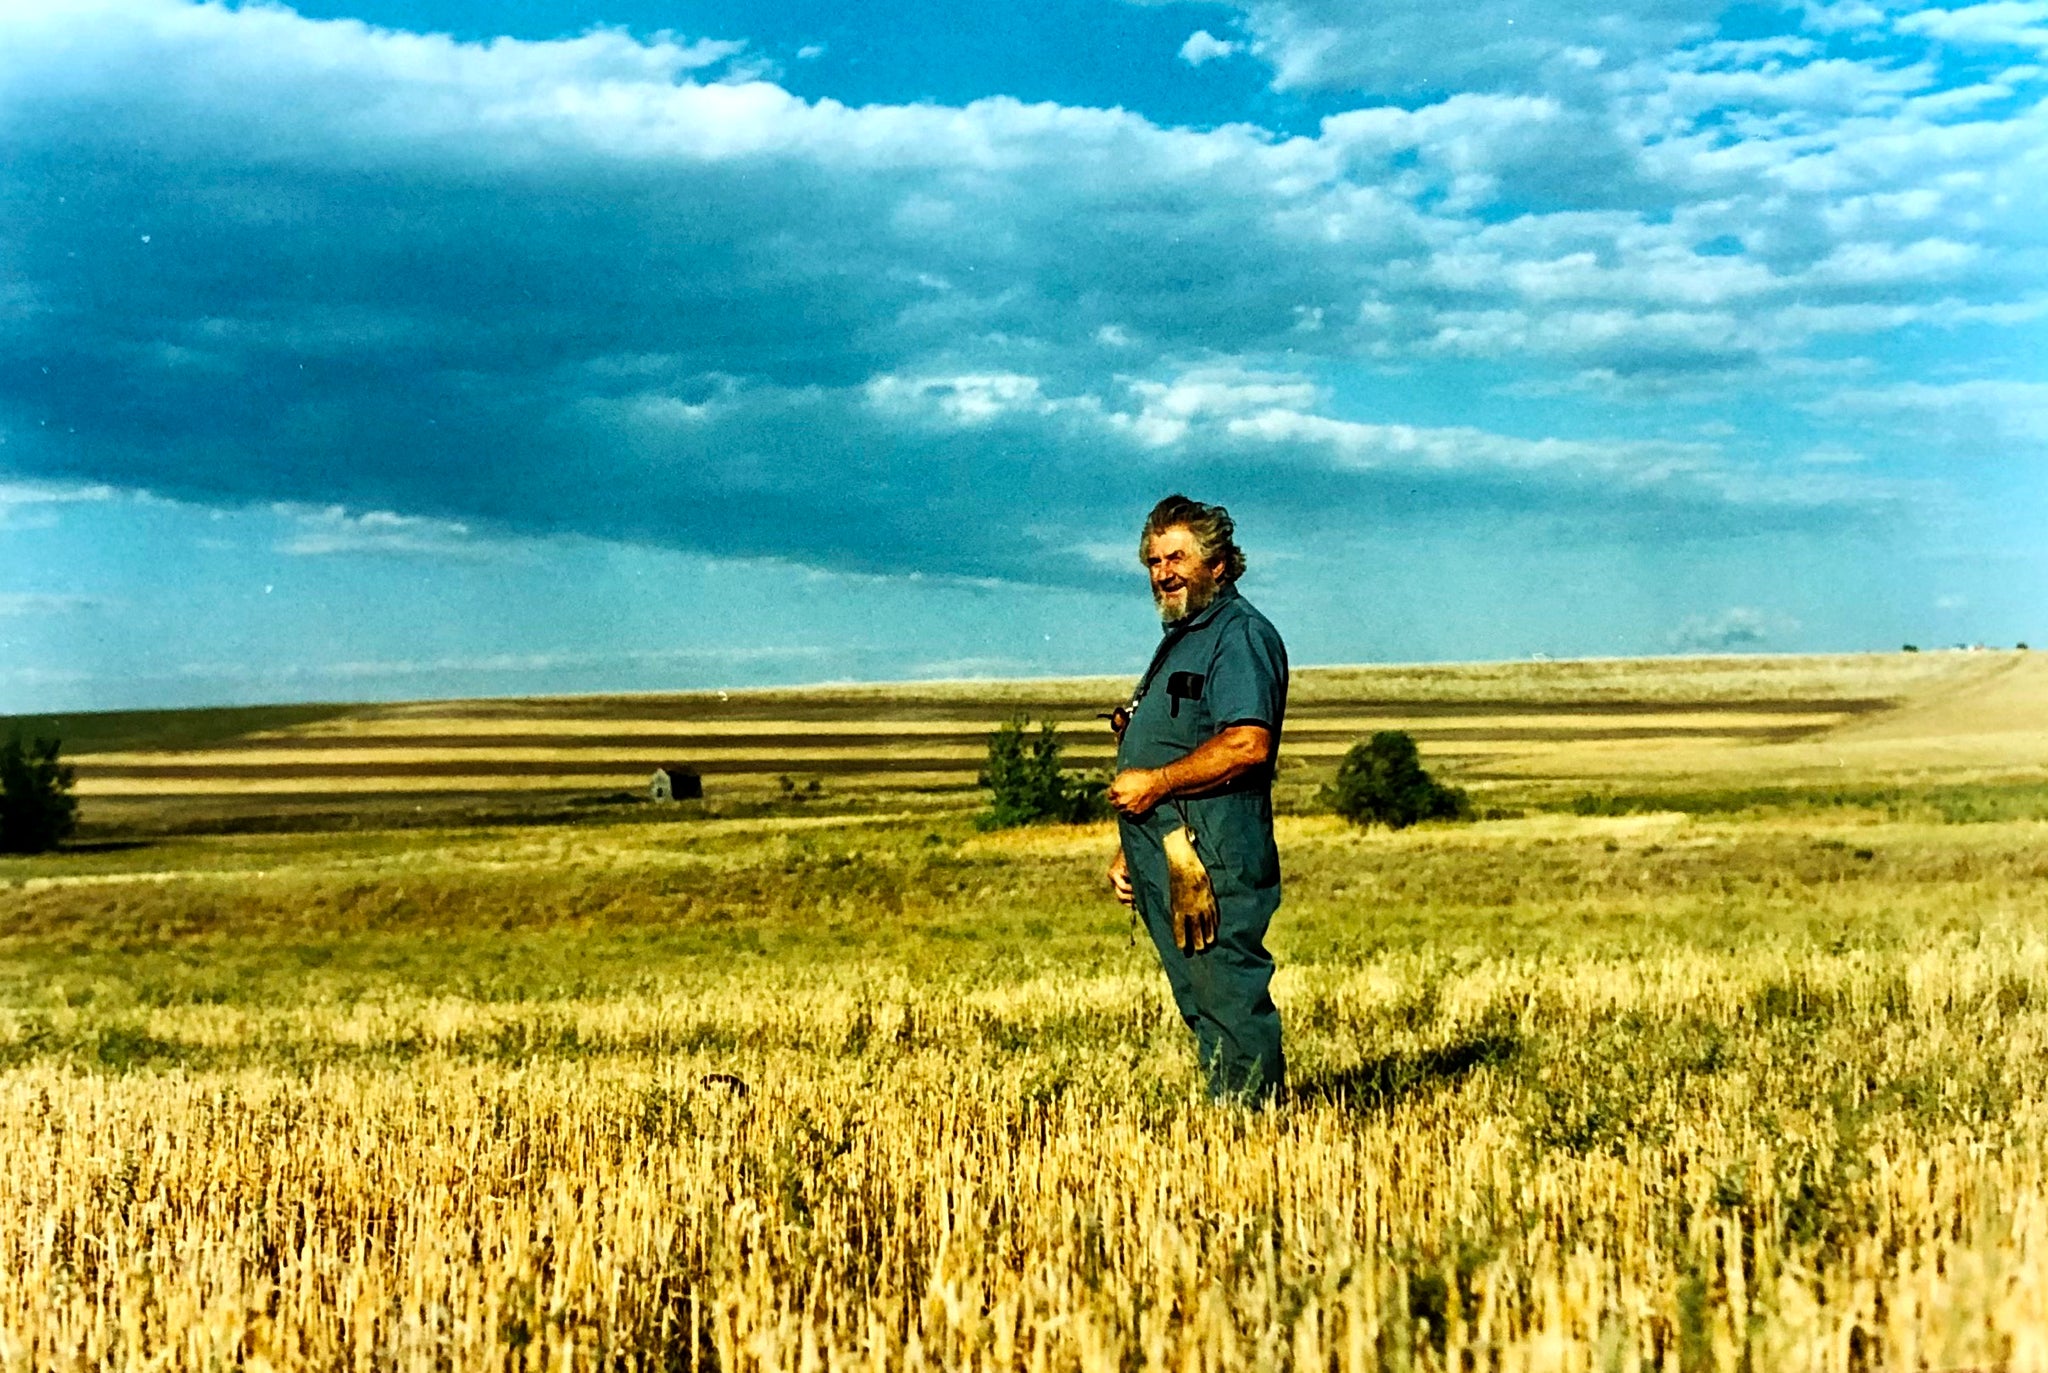 Erney standing in a field on the prairie